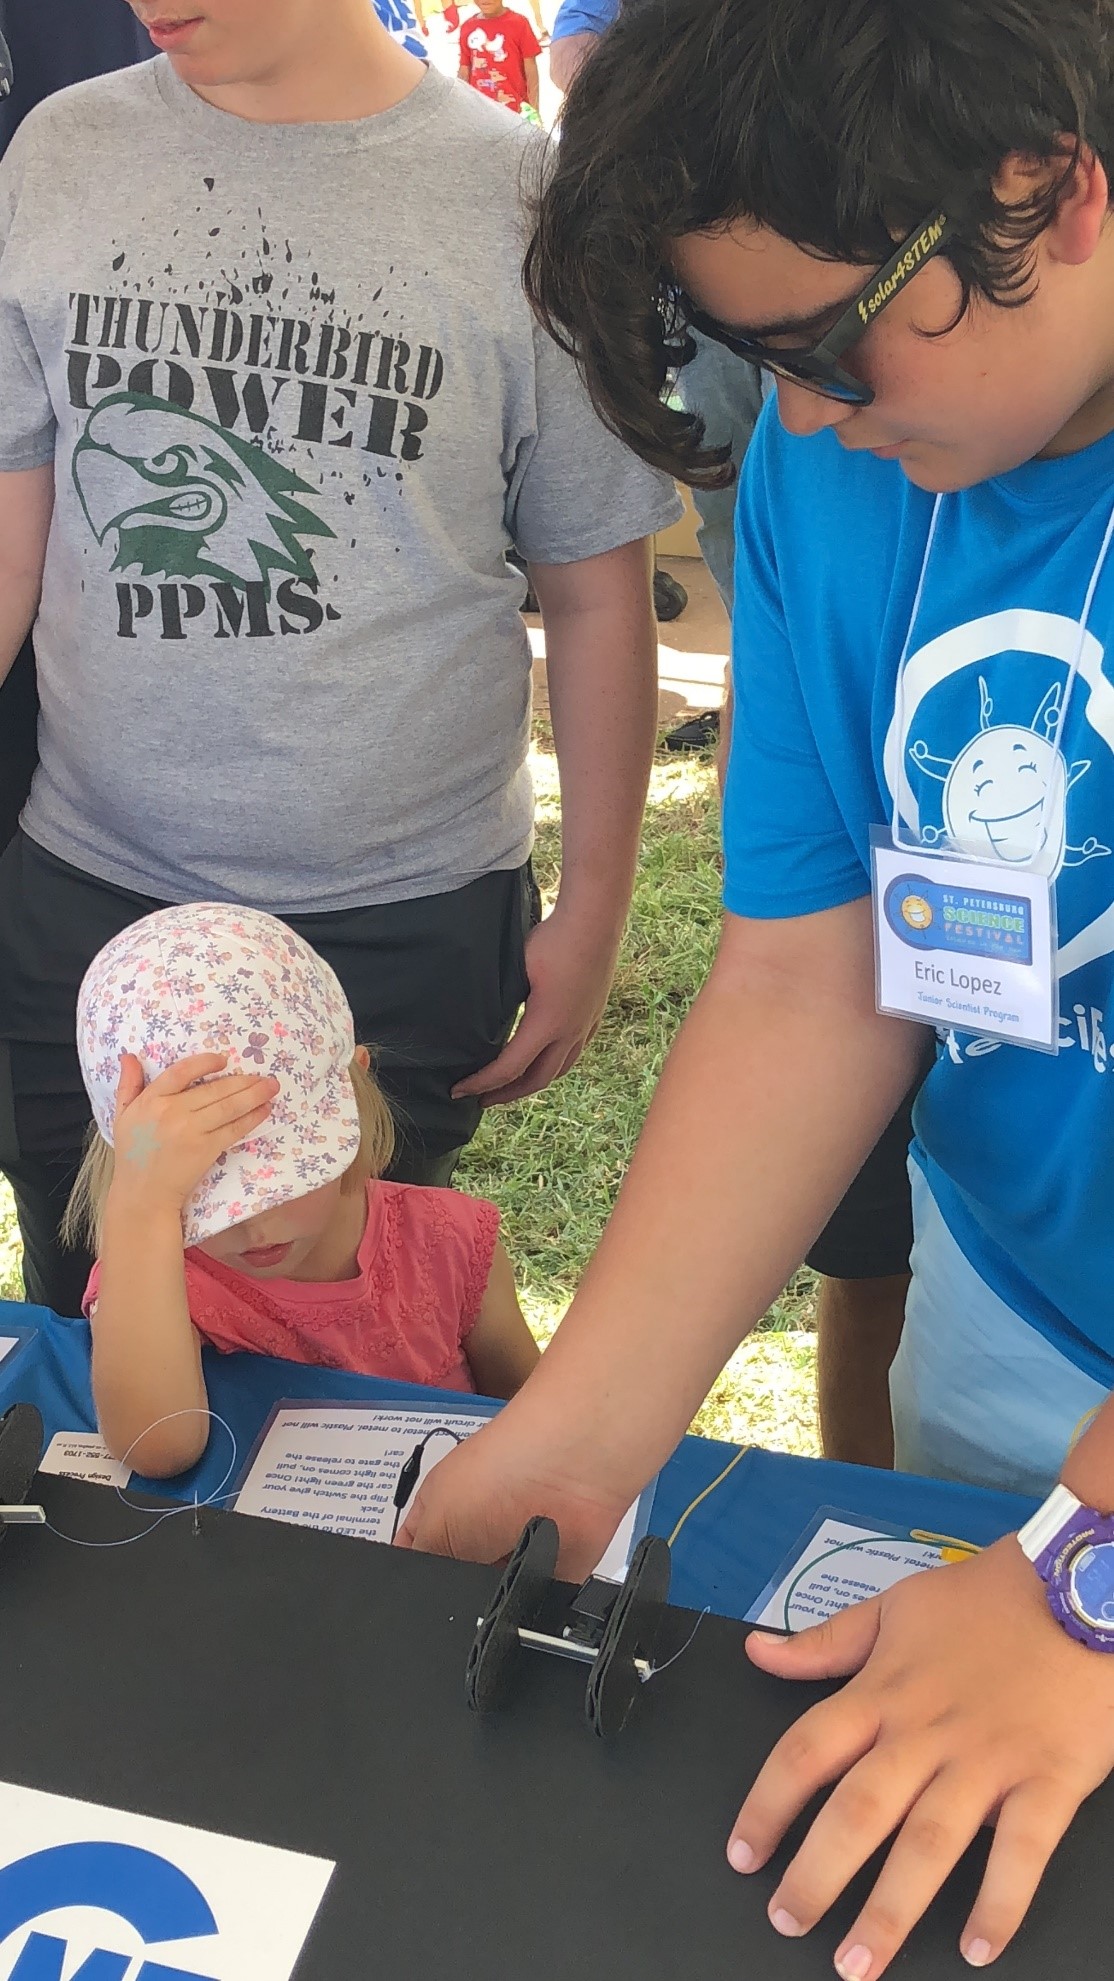 Junior Scientist, Eric Lopez, helps a young festival-goer at the Solar Car Race booth.